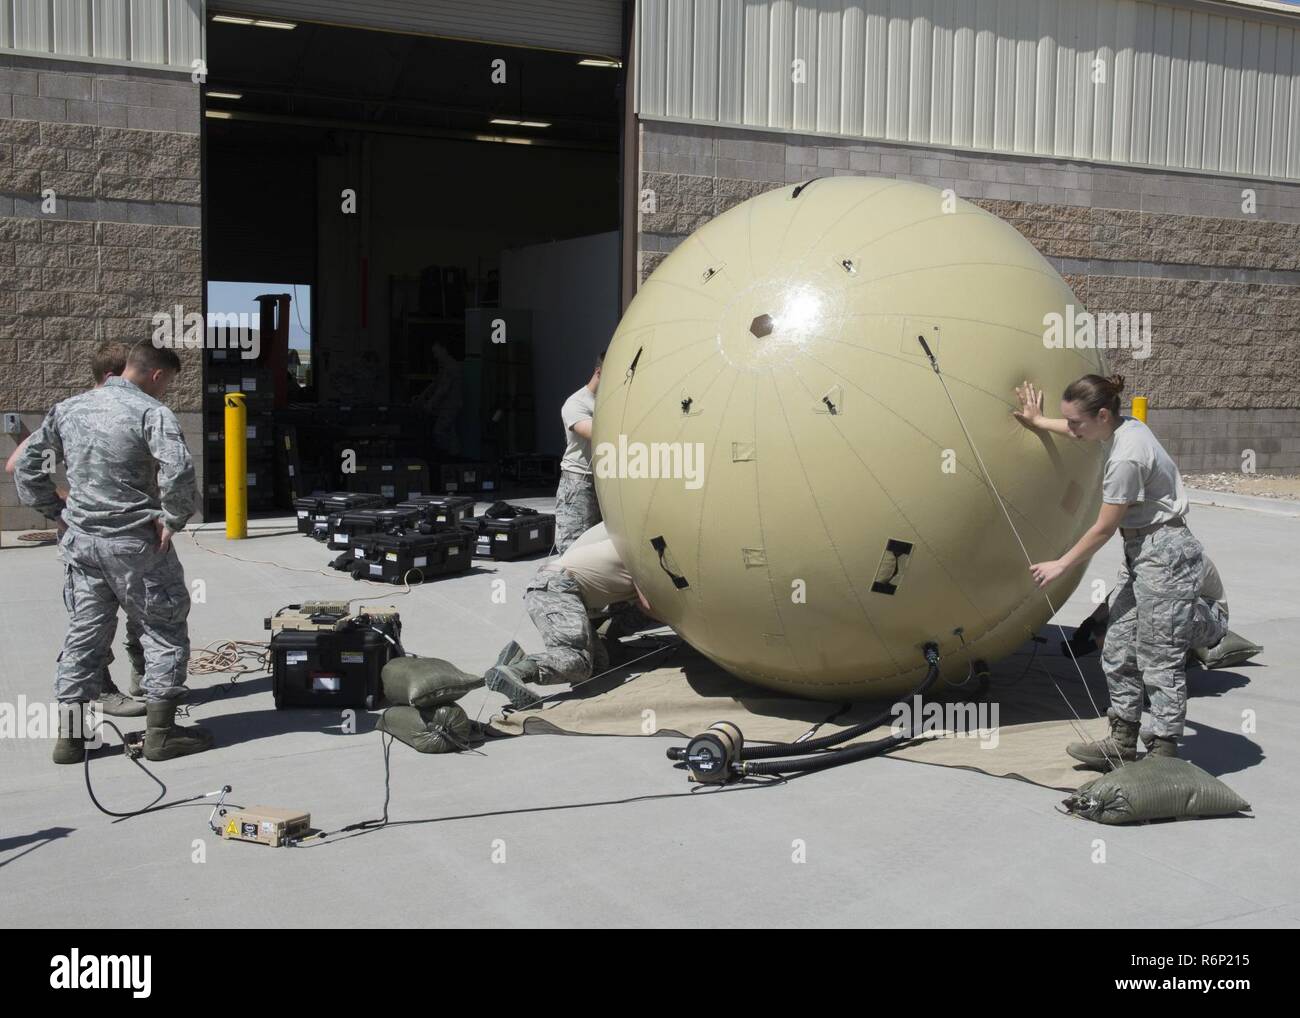 Members of the 726th Air Control Squadron assemble a Small Communications Package May 30, 2017, at Mountain Home Air Force Base, Idaho.  The inflatable system allows smaller teams to transport and employ it without relying on outside agencies. Stock Photo